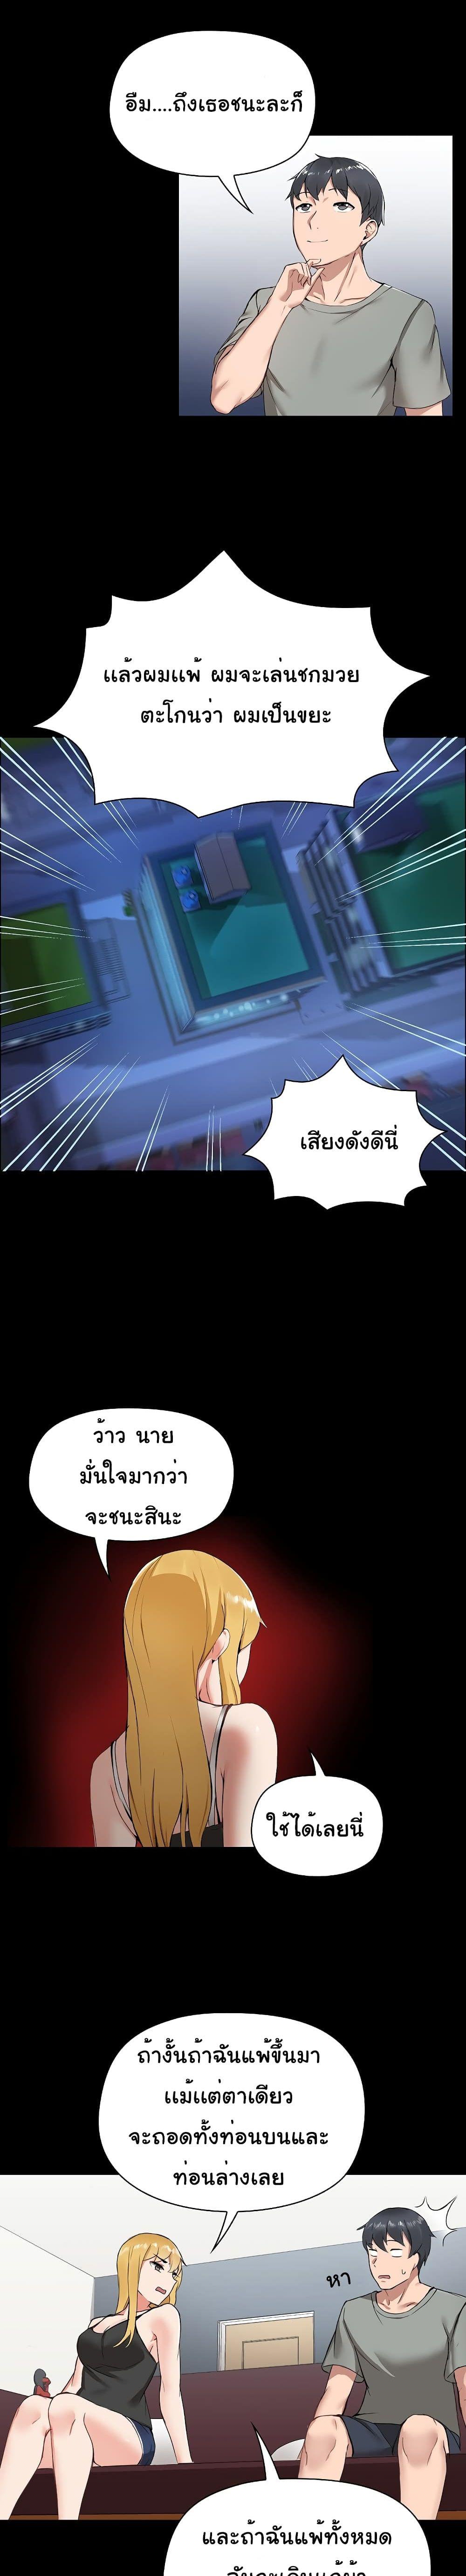 All About That Game Life 1 ภาพ 13